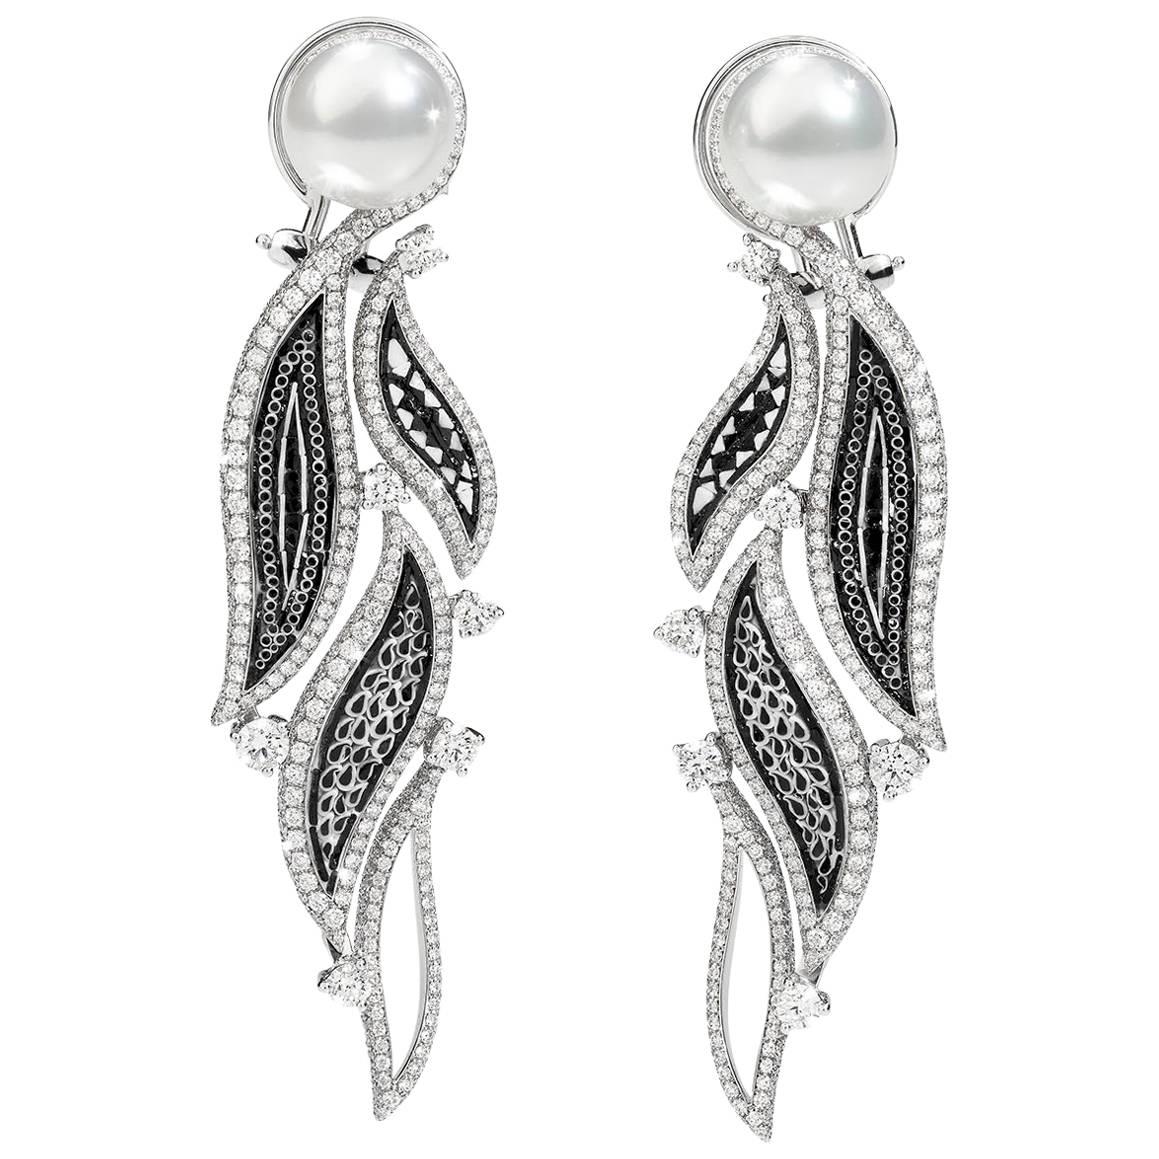 Stylish Earrings White Diamonds White Gold Pearls HandDecorated with Micromosaic For Sale